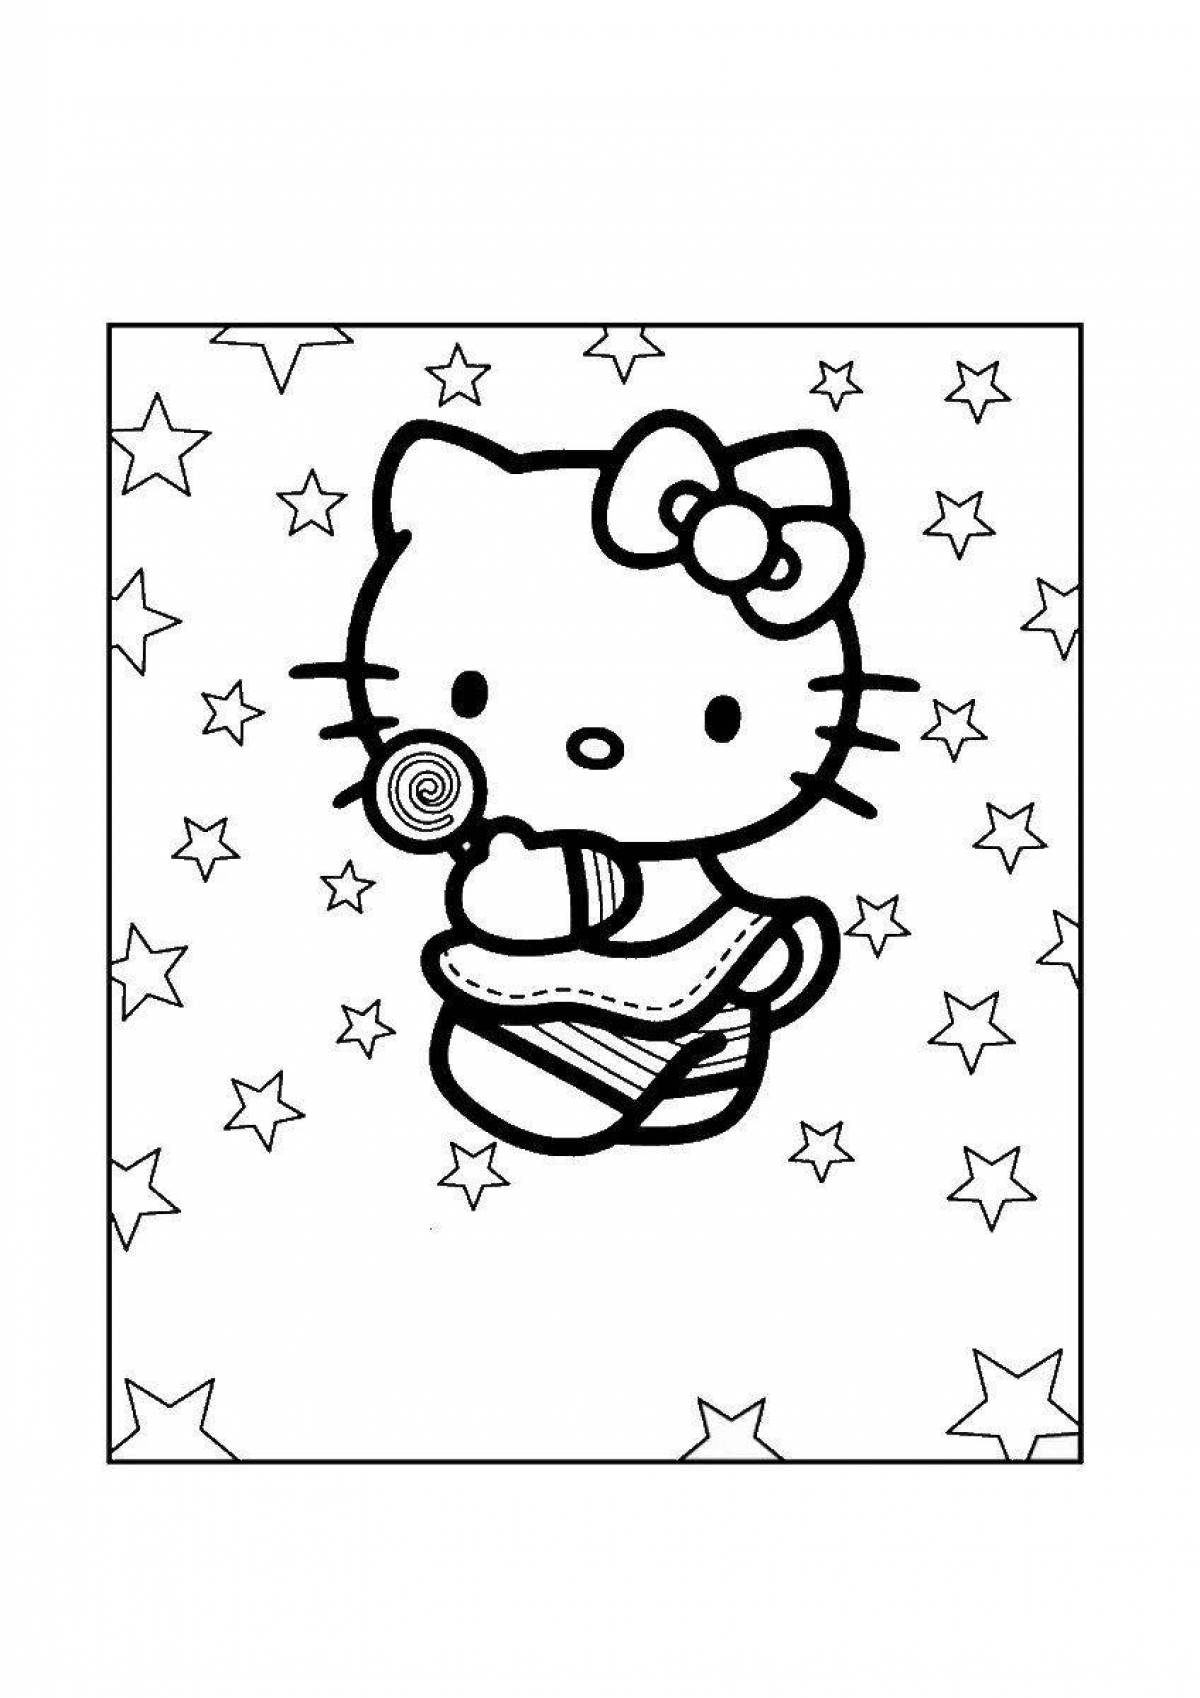 Coloring book energetic astro kitty